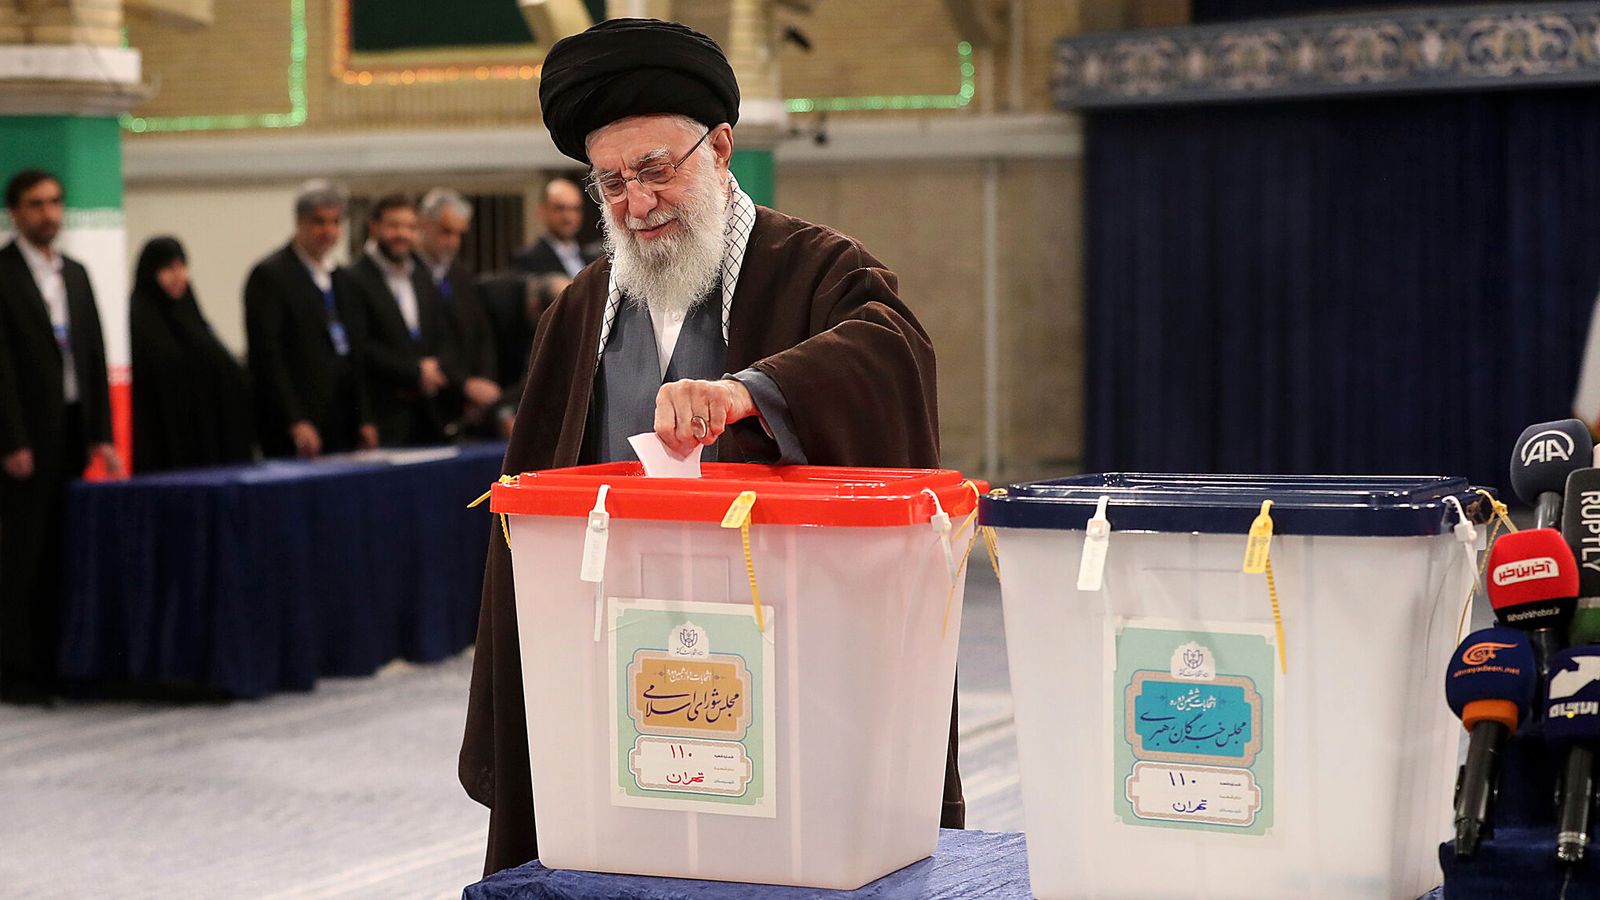 Iran election: 'Voting is meaningless' in 'sham' contest, regime's opponents say - as polls close